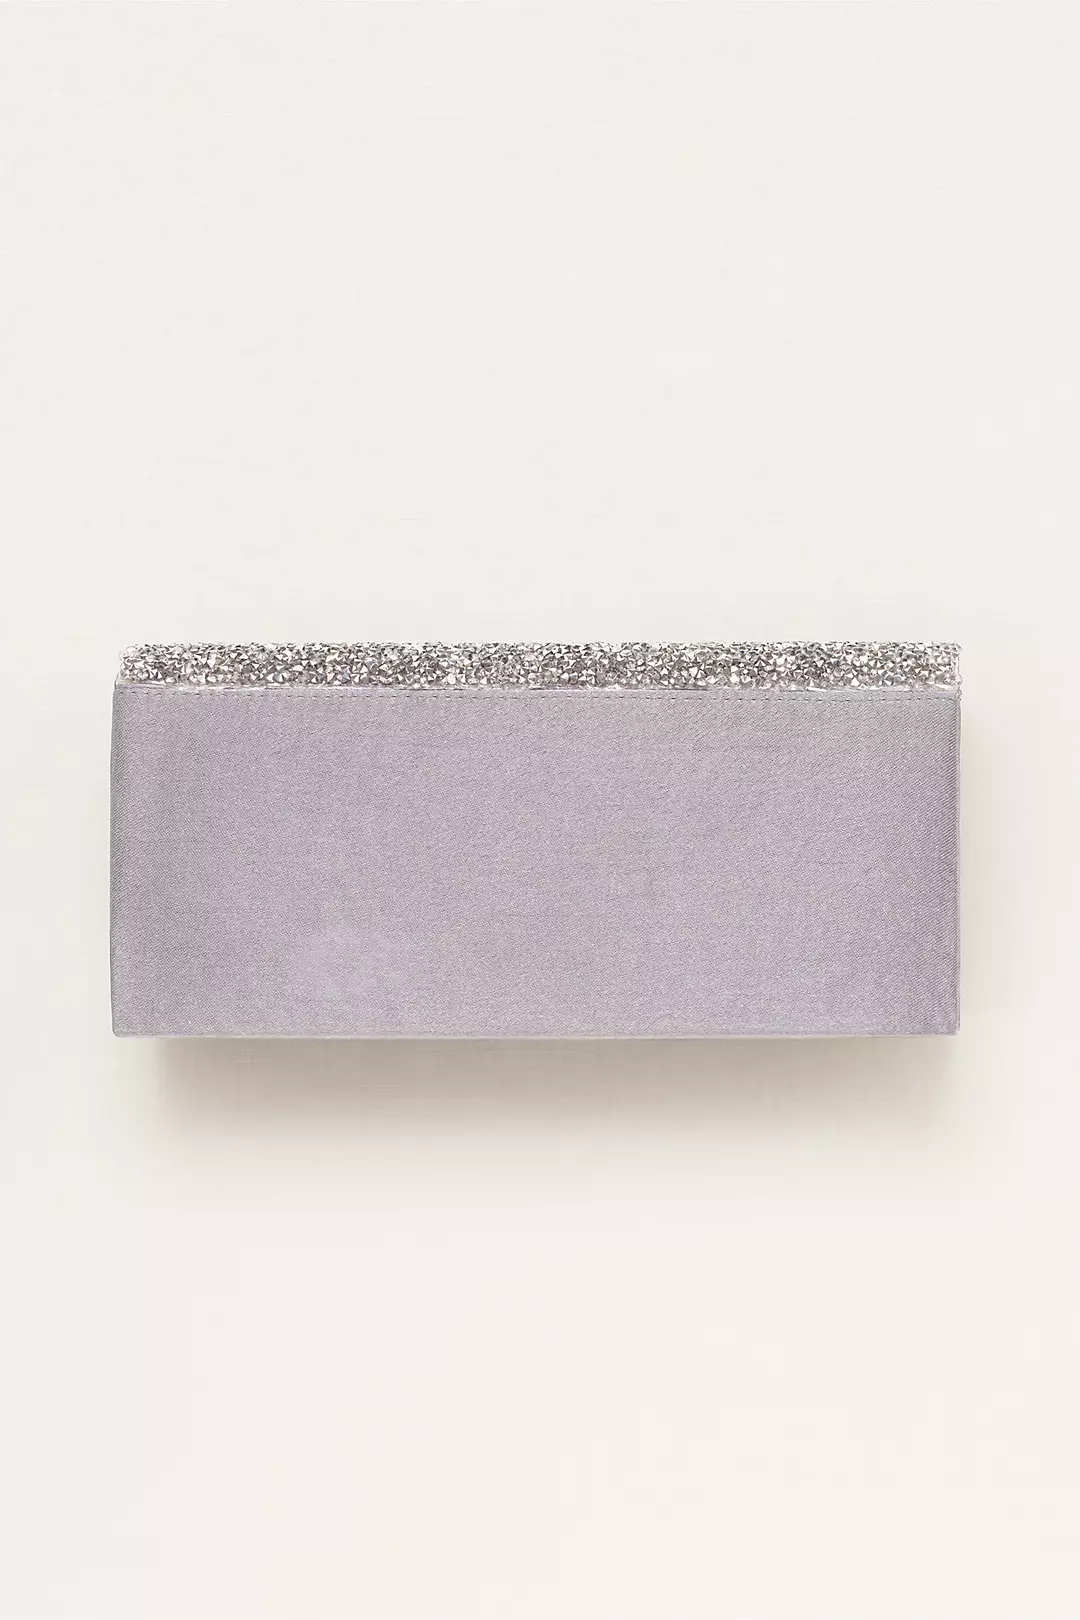 Satin Clutch with Sparkle Flap Image 2